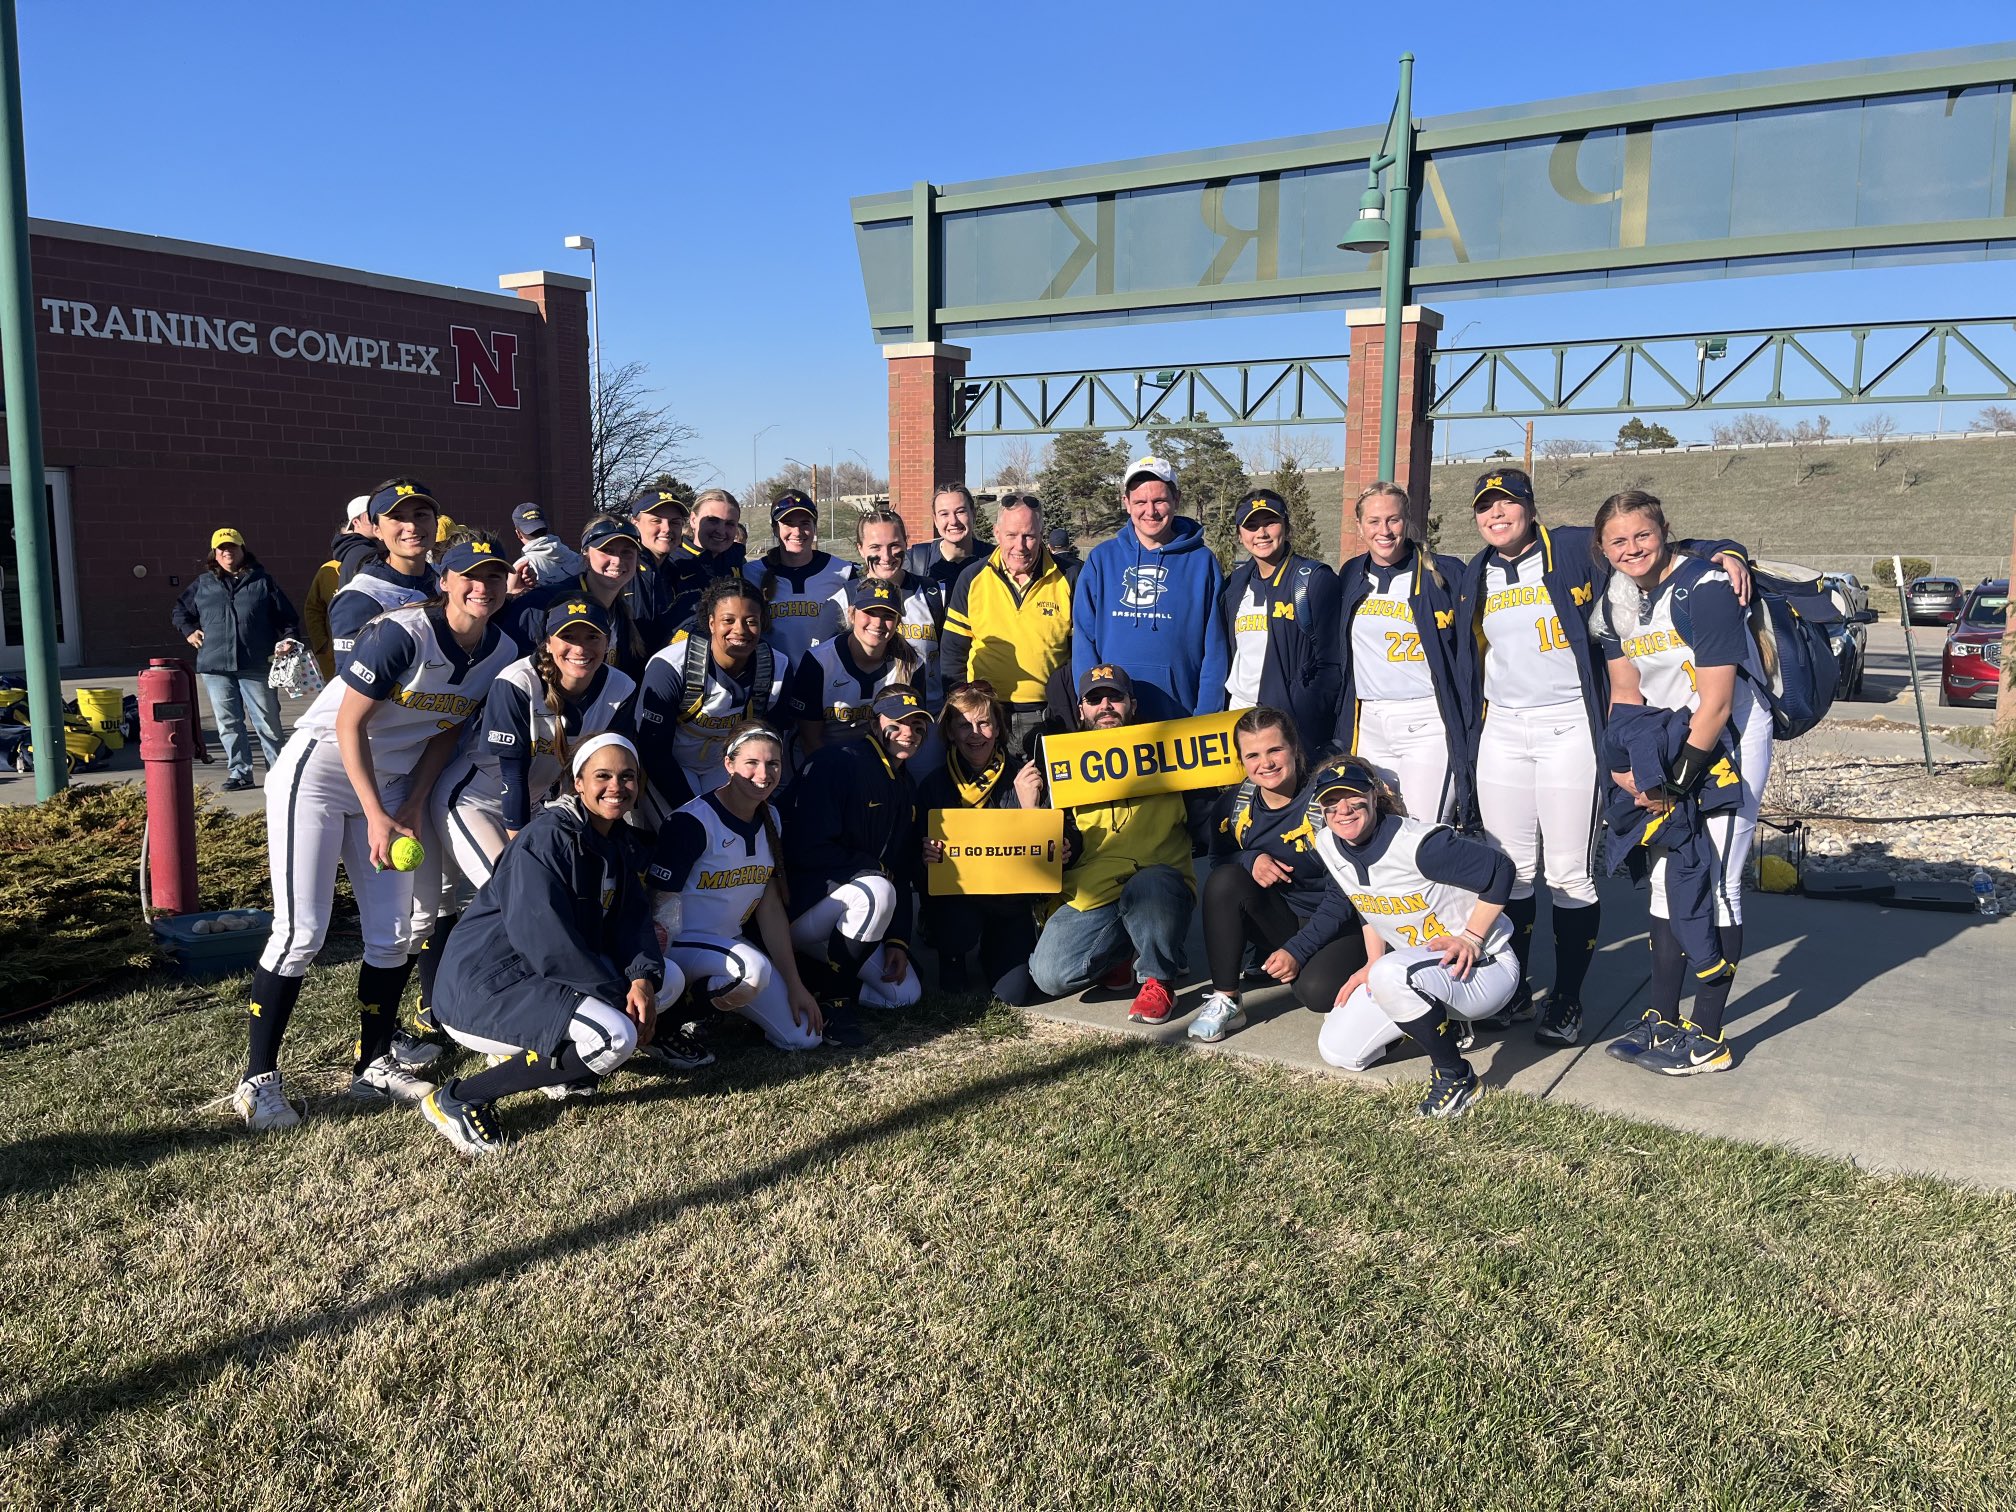 Members of the UM Club Of East Nebraska pose with U-M softball players and "Go Blue" signs outside a brick sports complex.